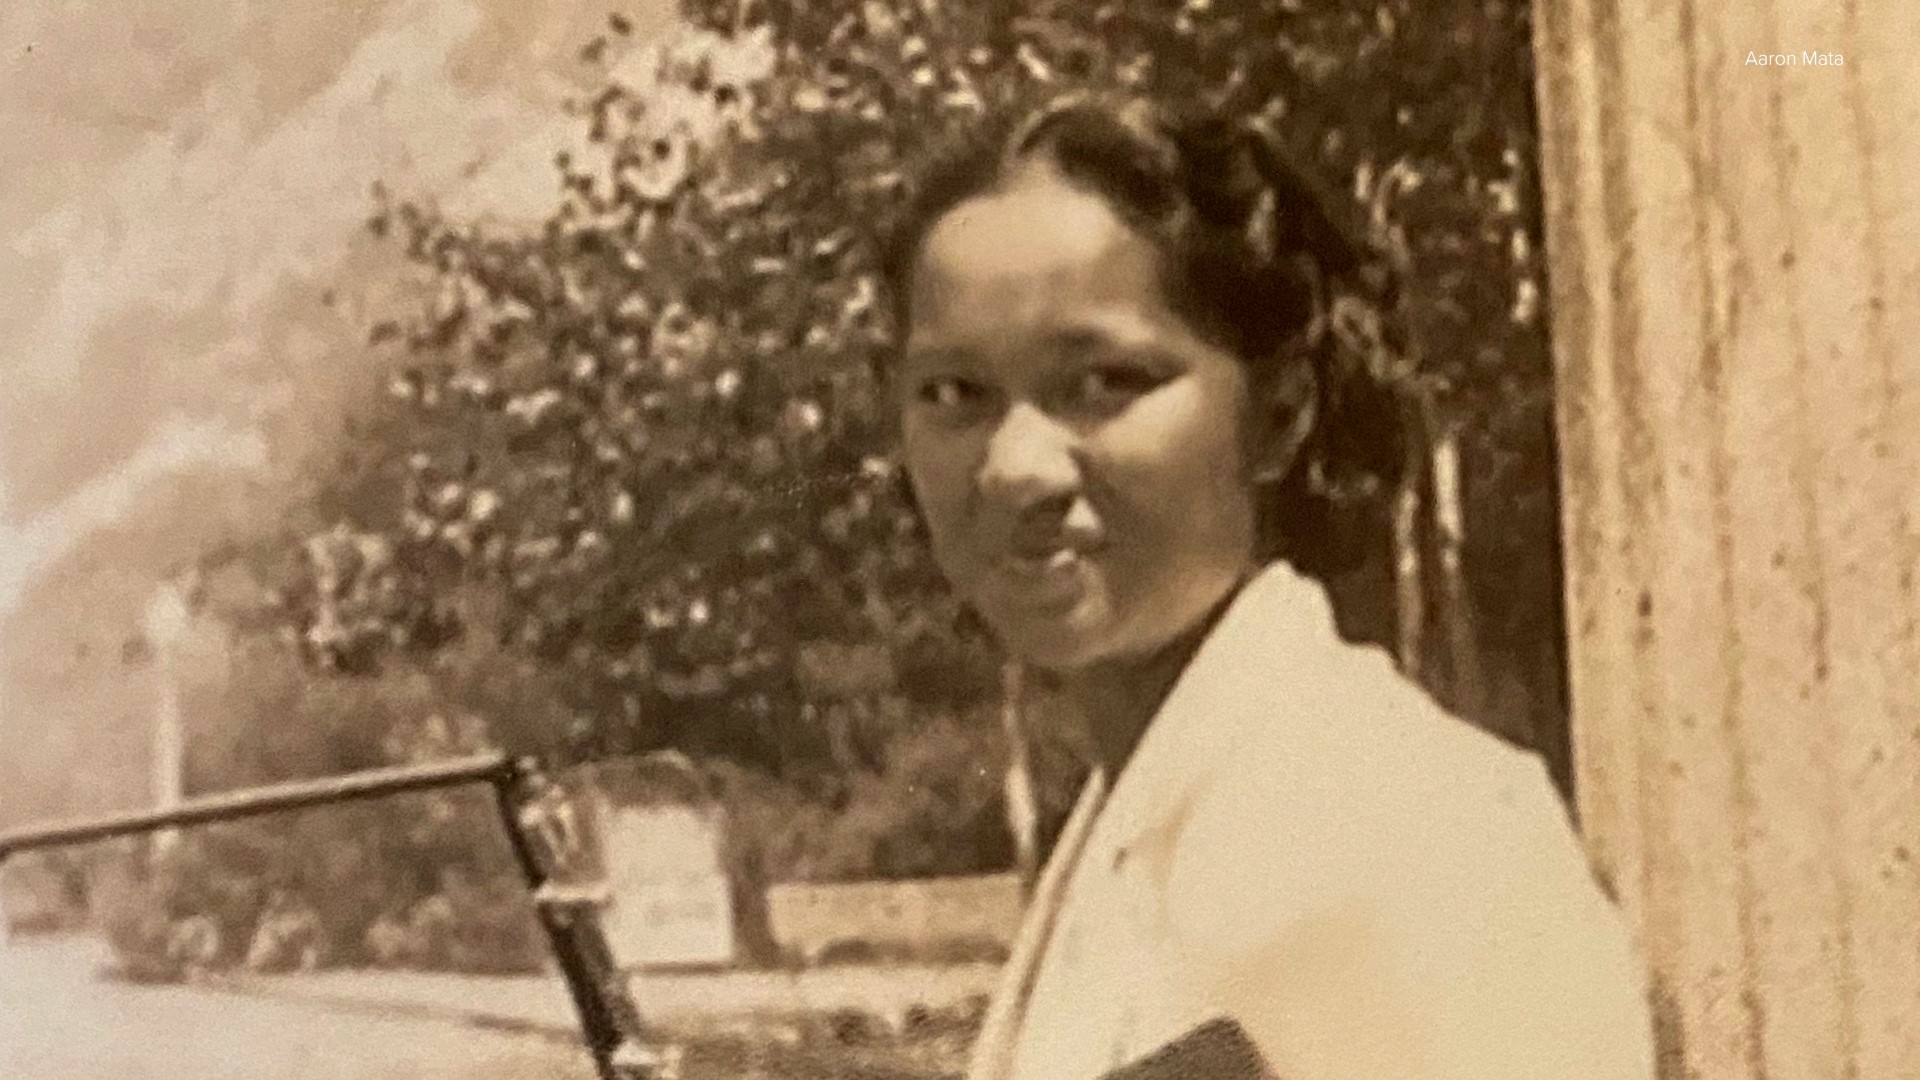 During a time when it was difficult for people of color to become teachers, Flora Arca Mata was a trailblazer for the Filipino-American community.